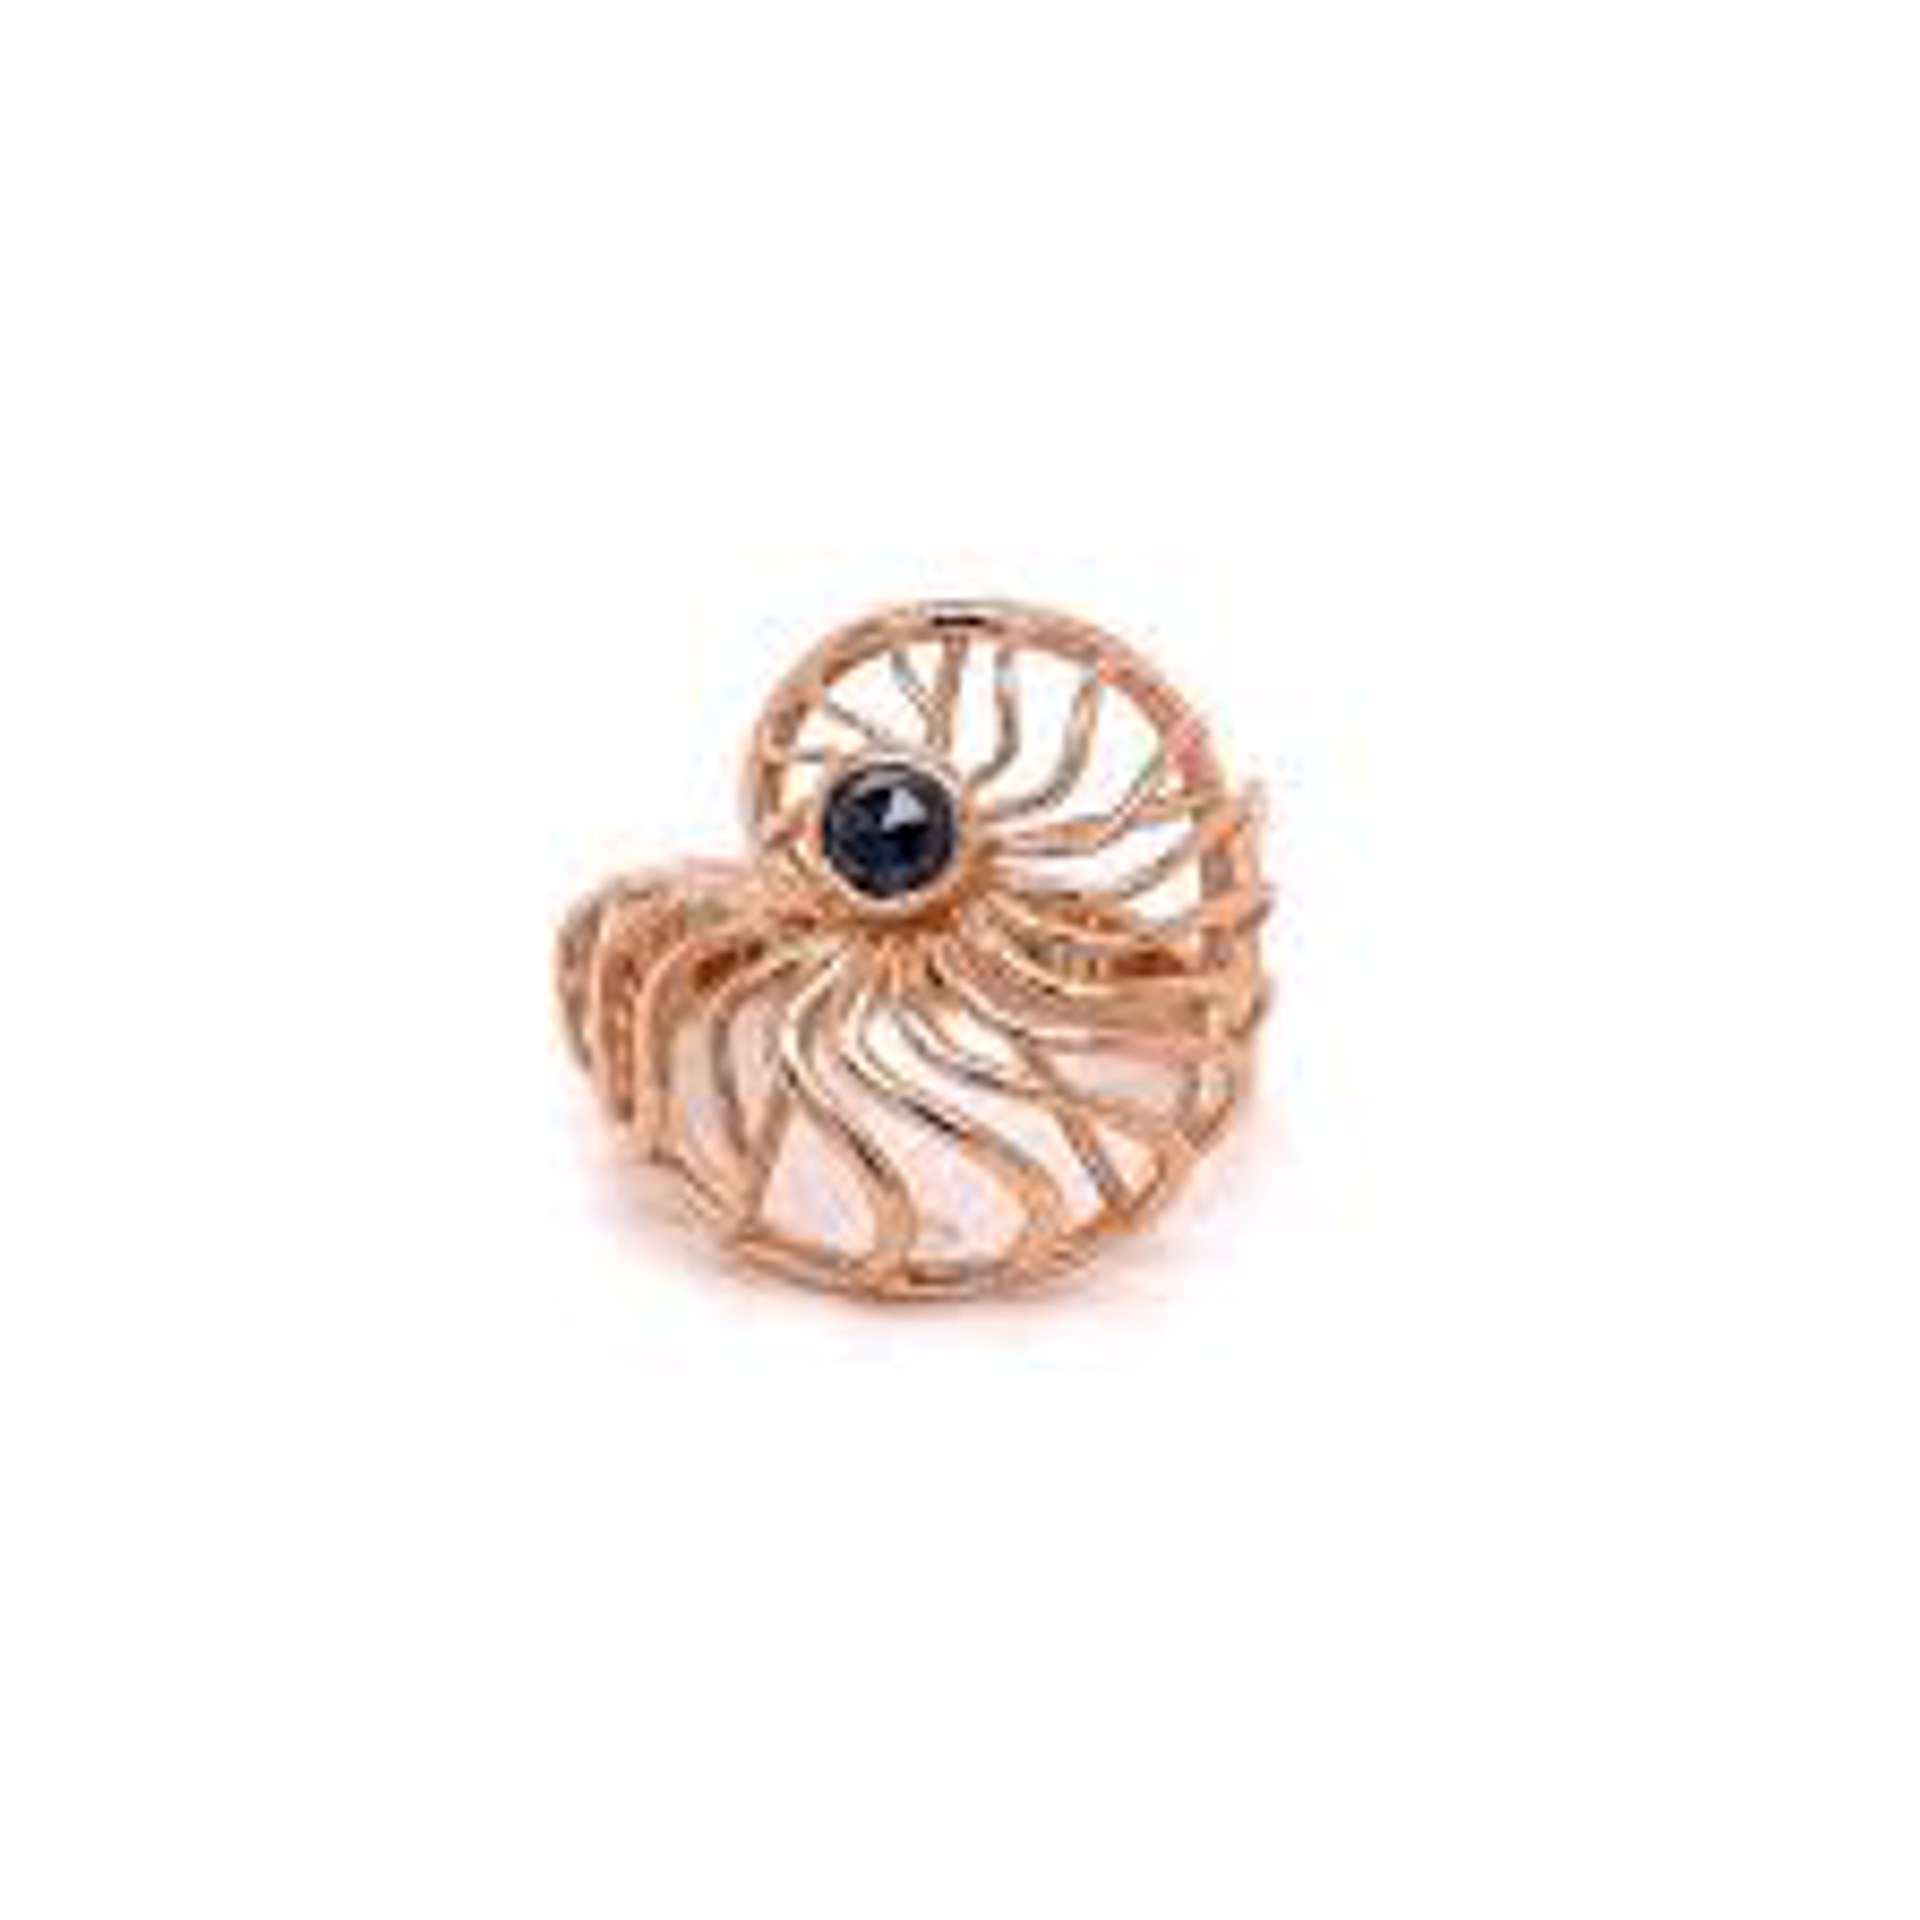 Ammonite Shell Ring by Llyn Strong